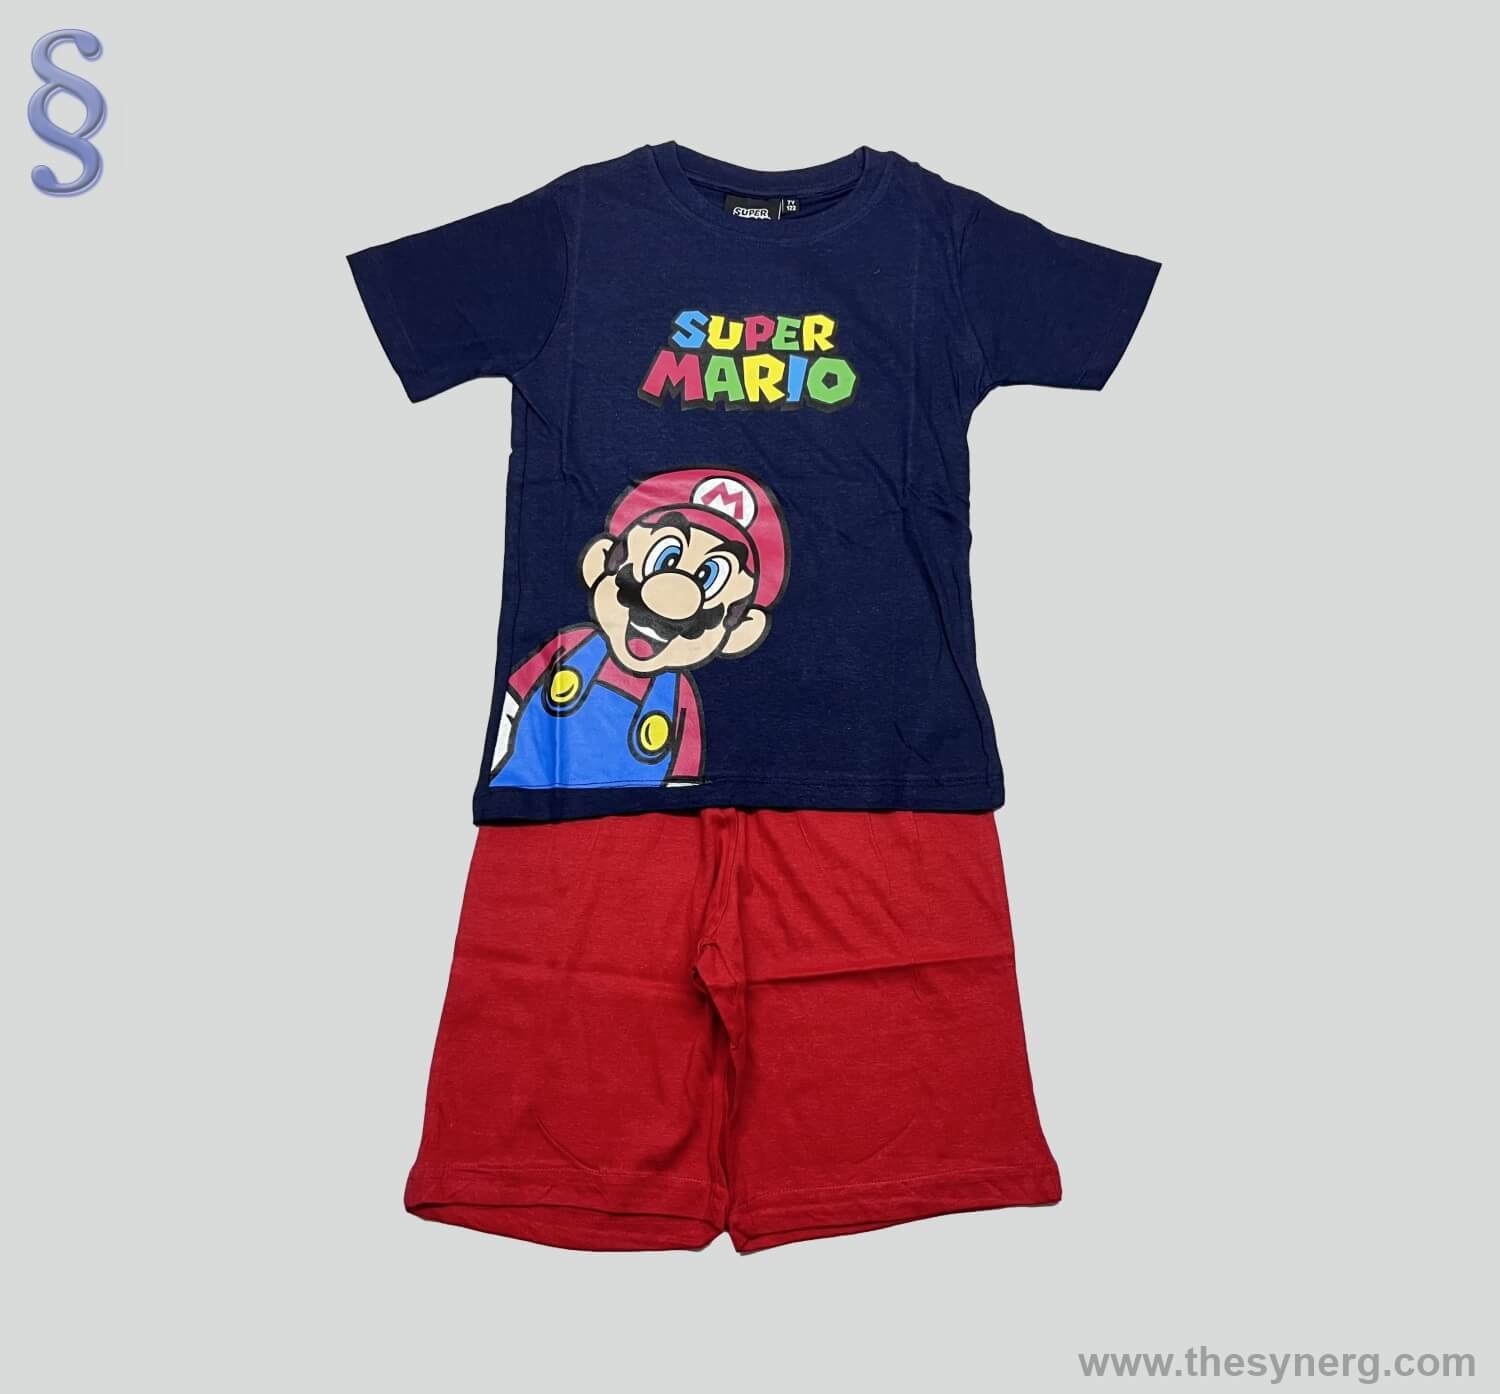 Mario printed children's pajama with shorts made by Synerg which is a top pajama manufacturer in india